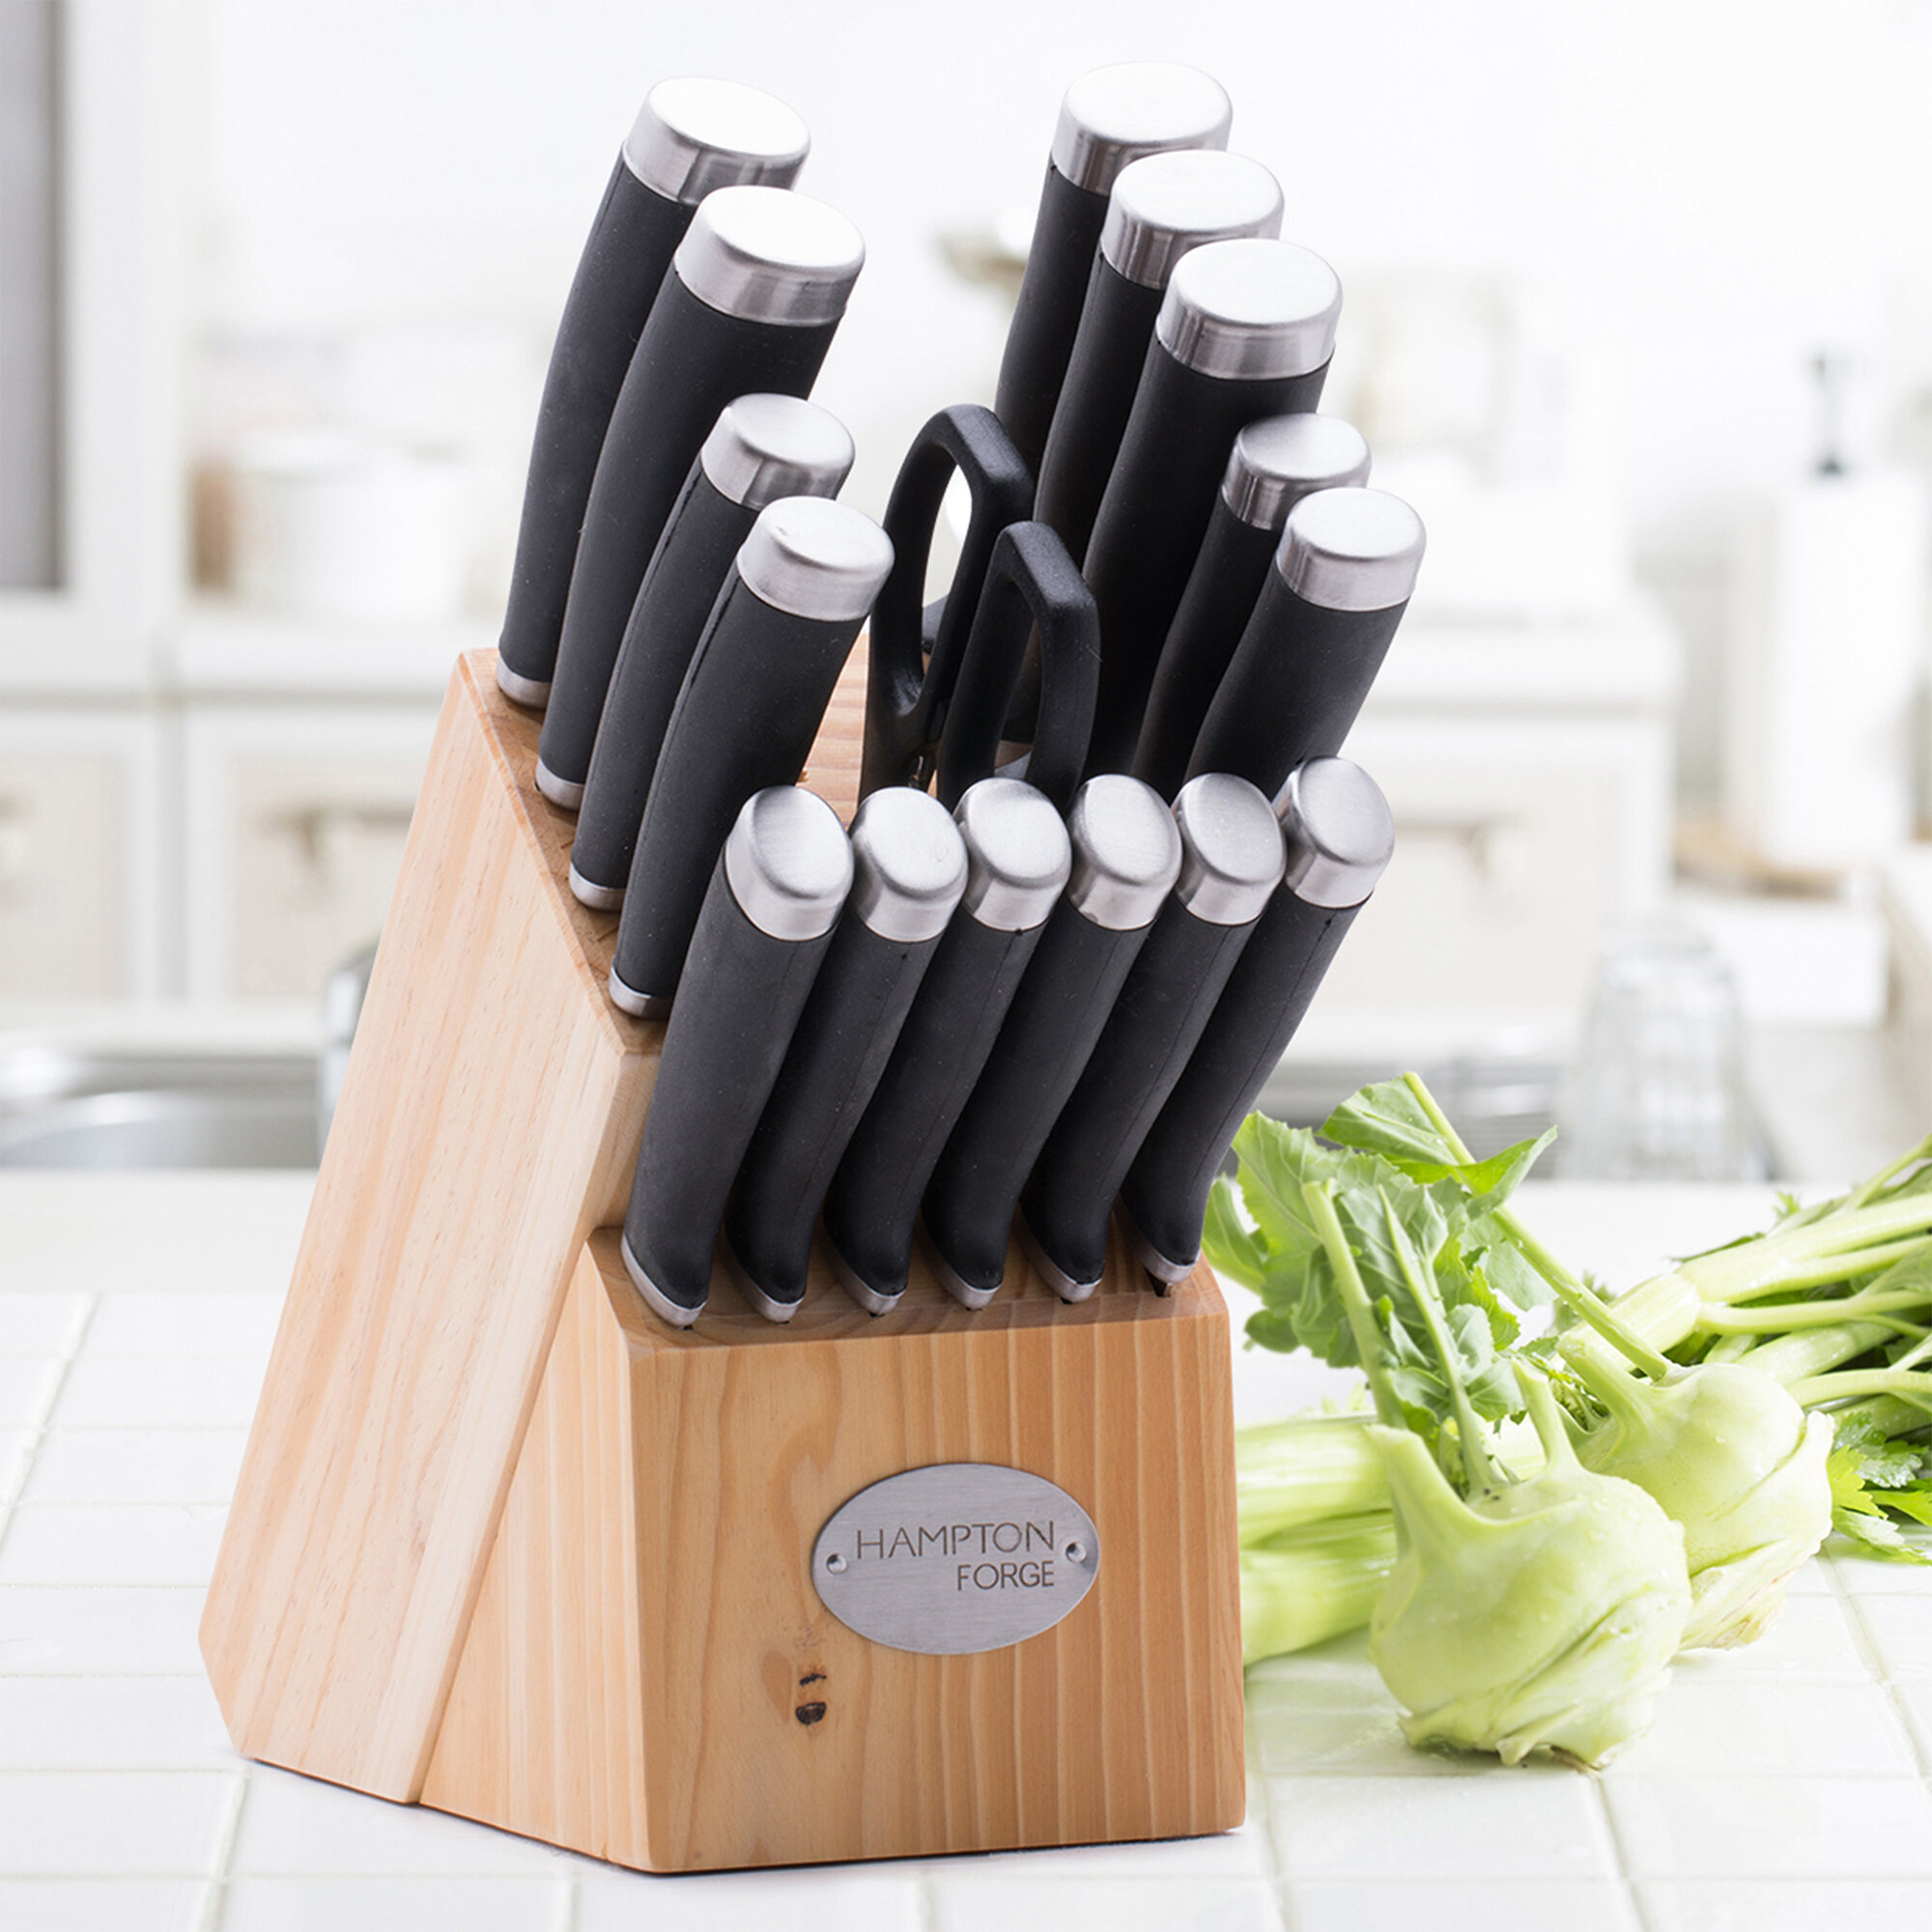 Little Cook 17 PCS Kitchen knife set, German Stainless Steel Chef Knife  Sets for Kitchen with Block